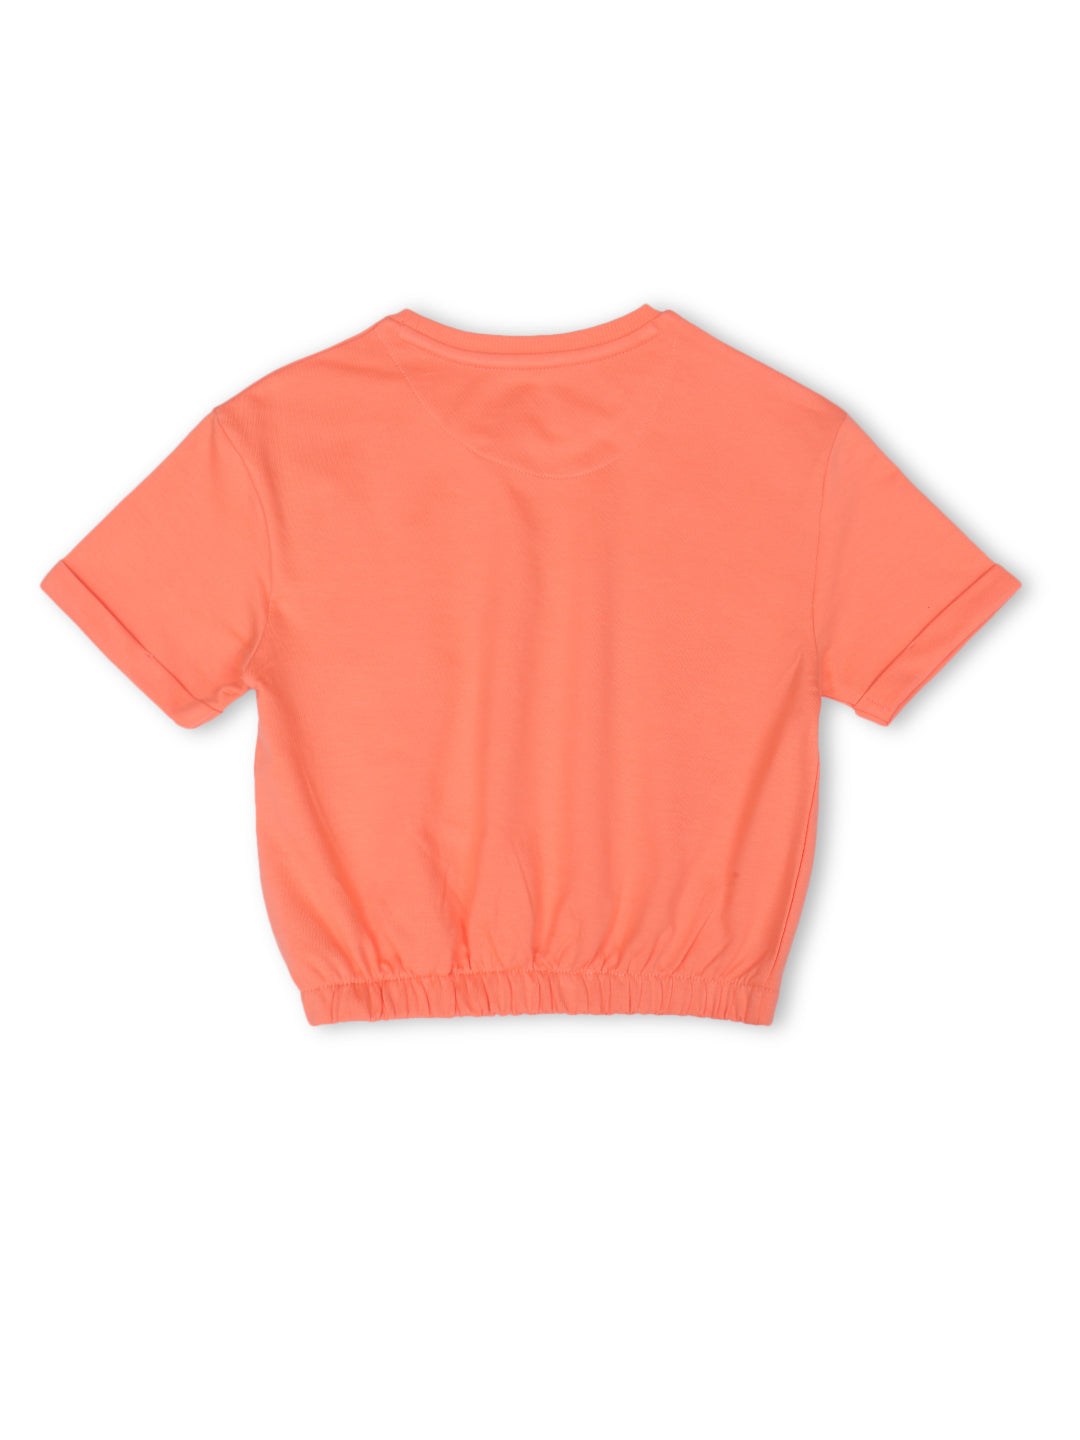 Girls Coral Cotton Solid Knits Top